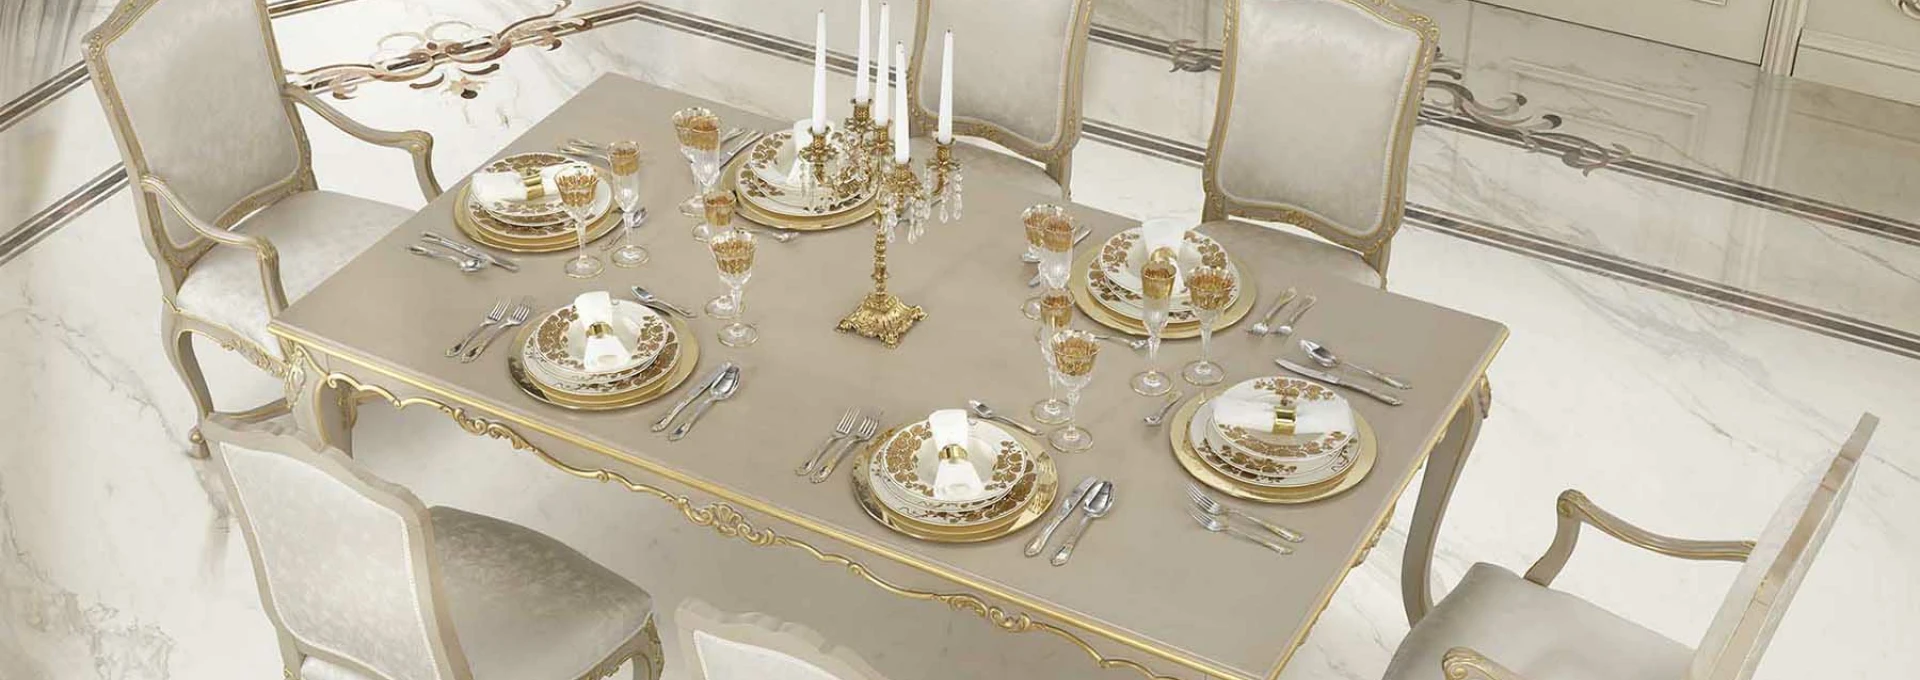 Culinary Artistry: Modenese's Exquisite Plates and Cutlery Collection